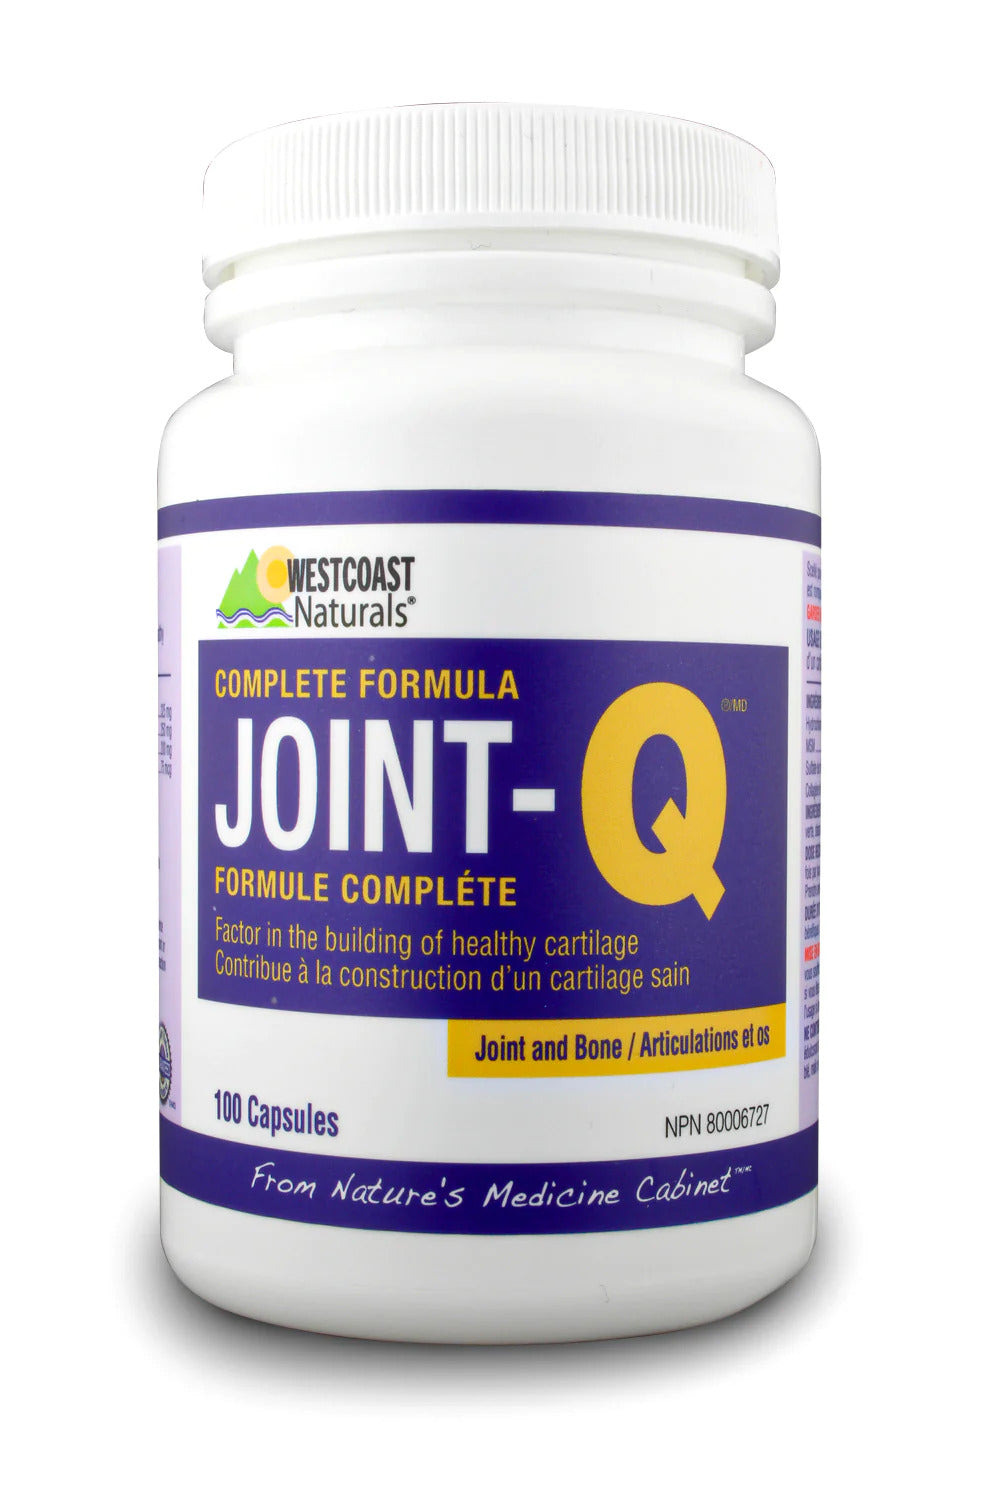 Joint-Q Complete Joint Formula (Westcoast Naturals) - 850 mg